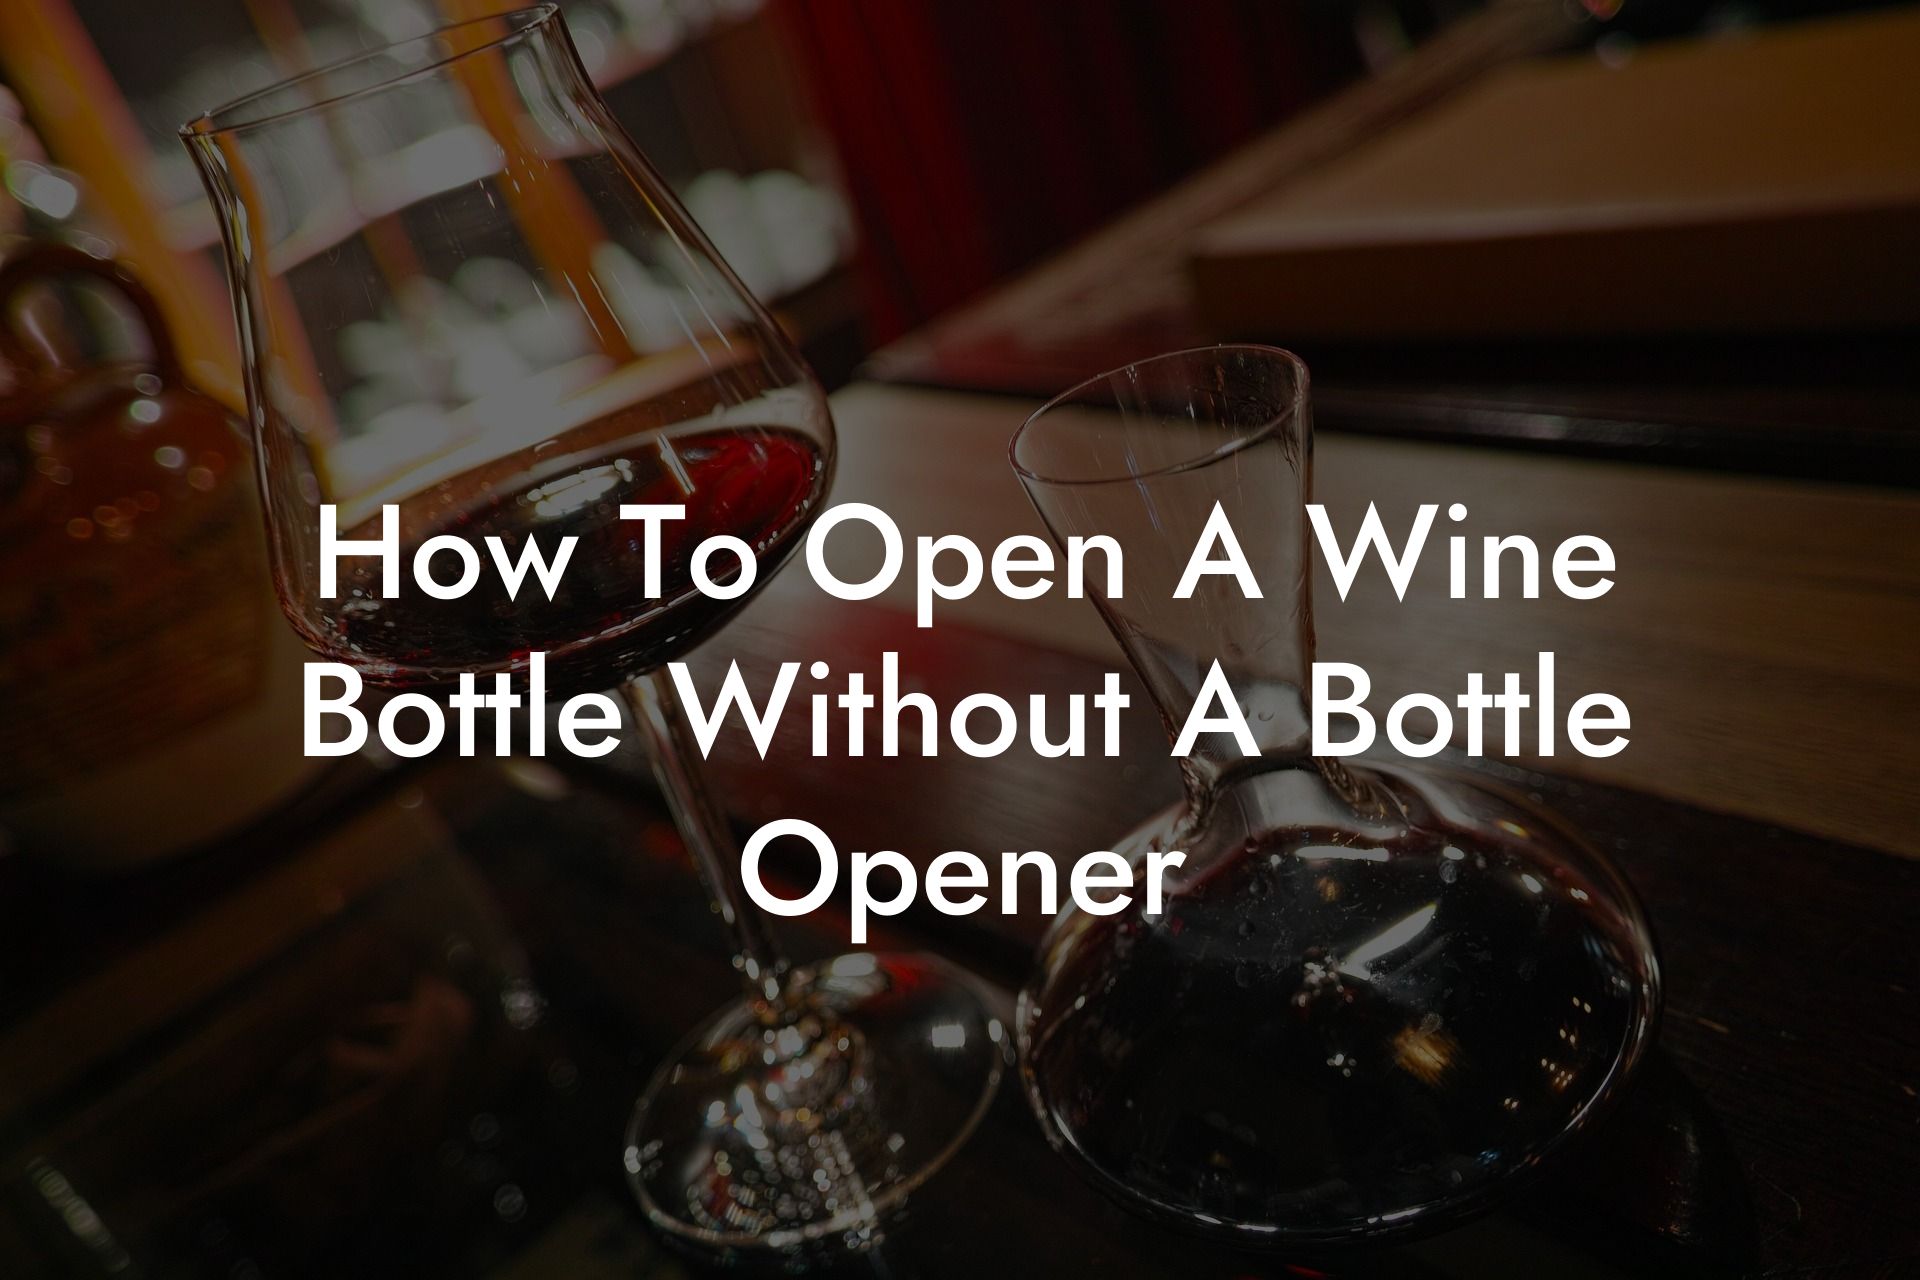 How To Open A Wine Bottle Without A Bottle Opener